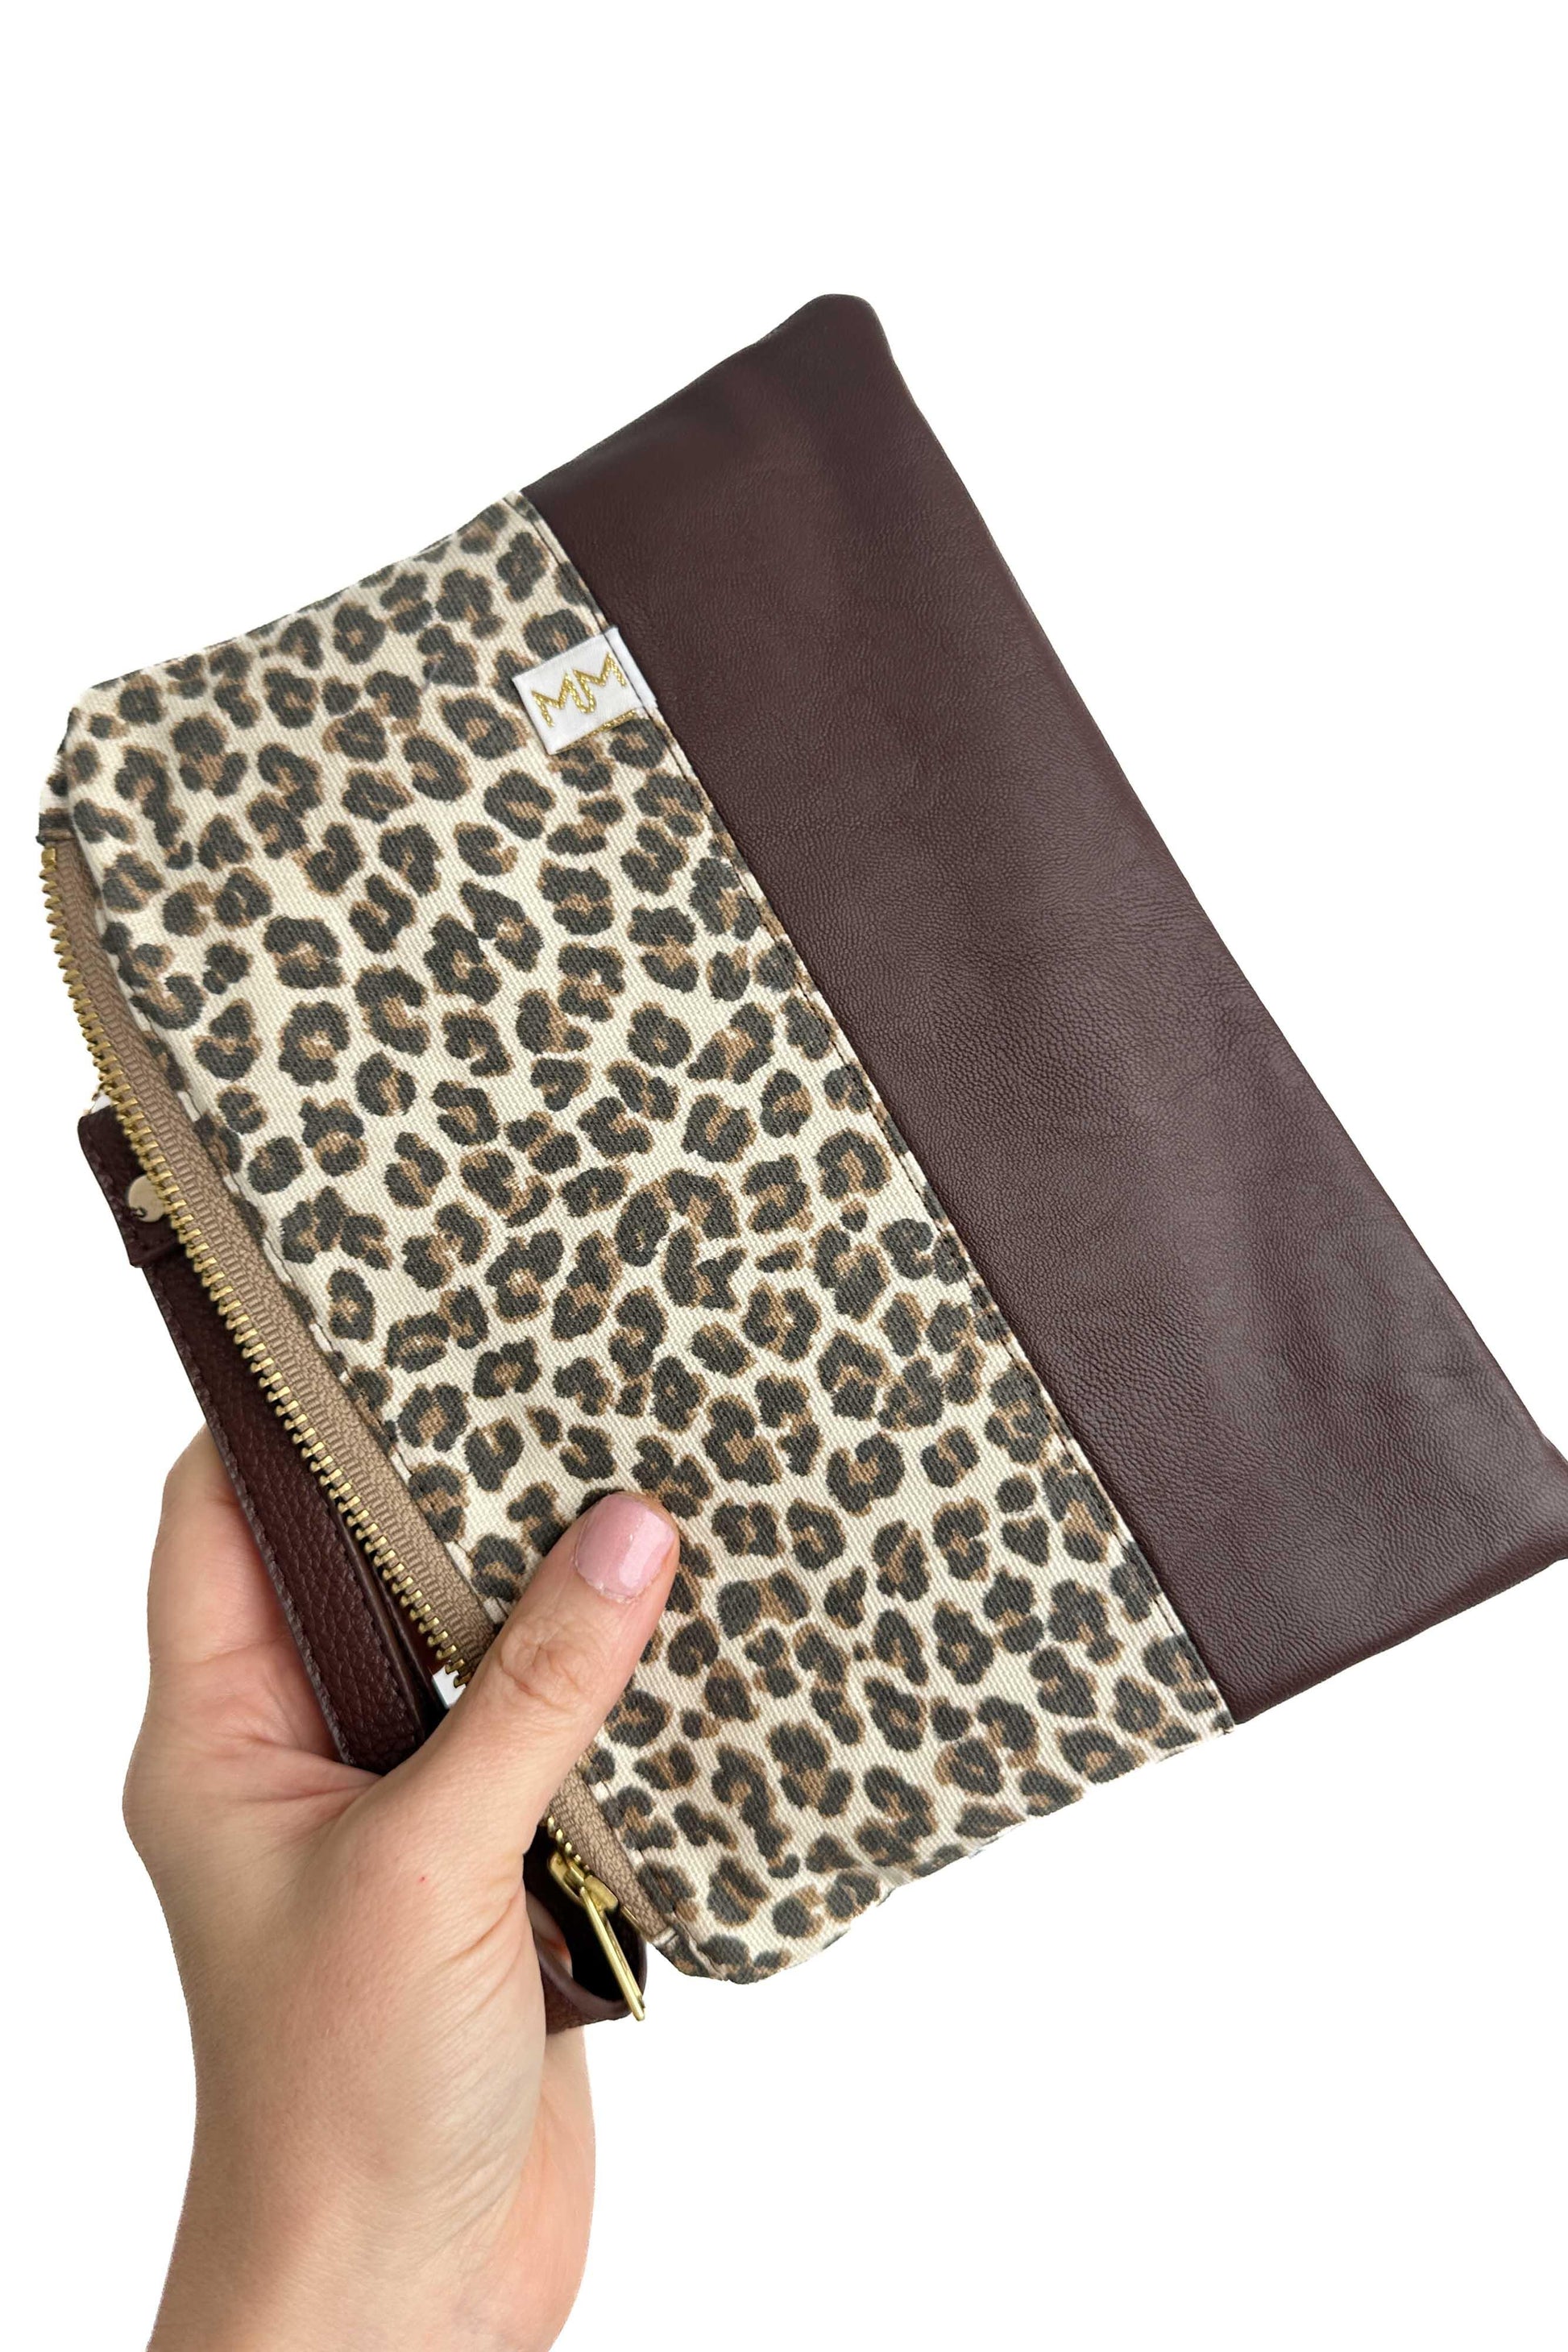 Leopard Convertible Crossbody Wristlet+ with Compartments READY TO SHIP - Modern Makerie